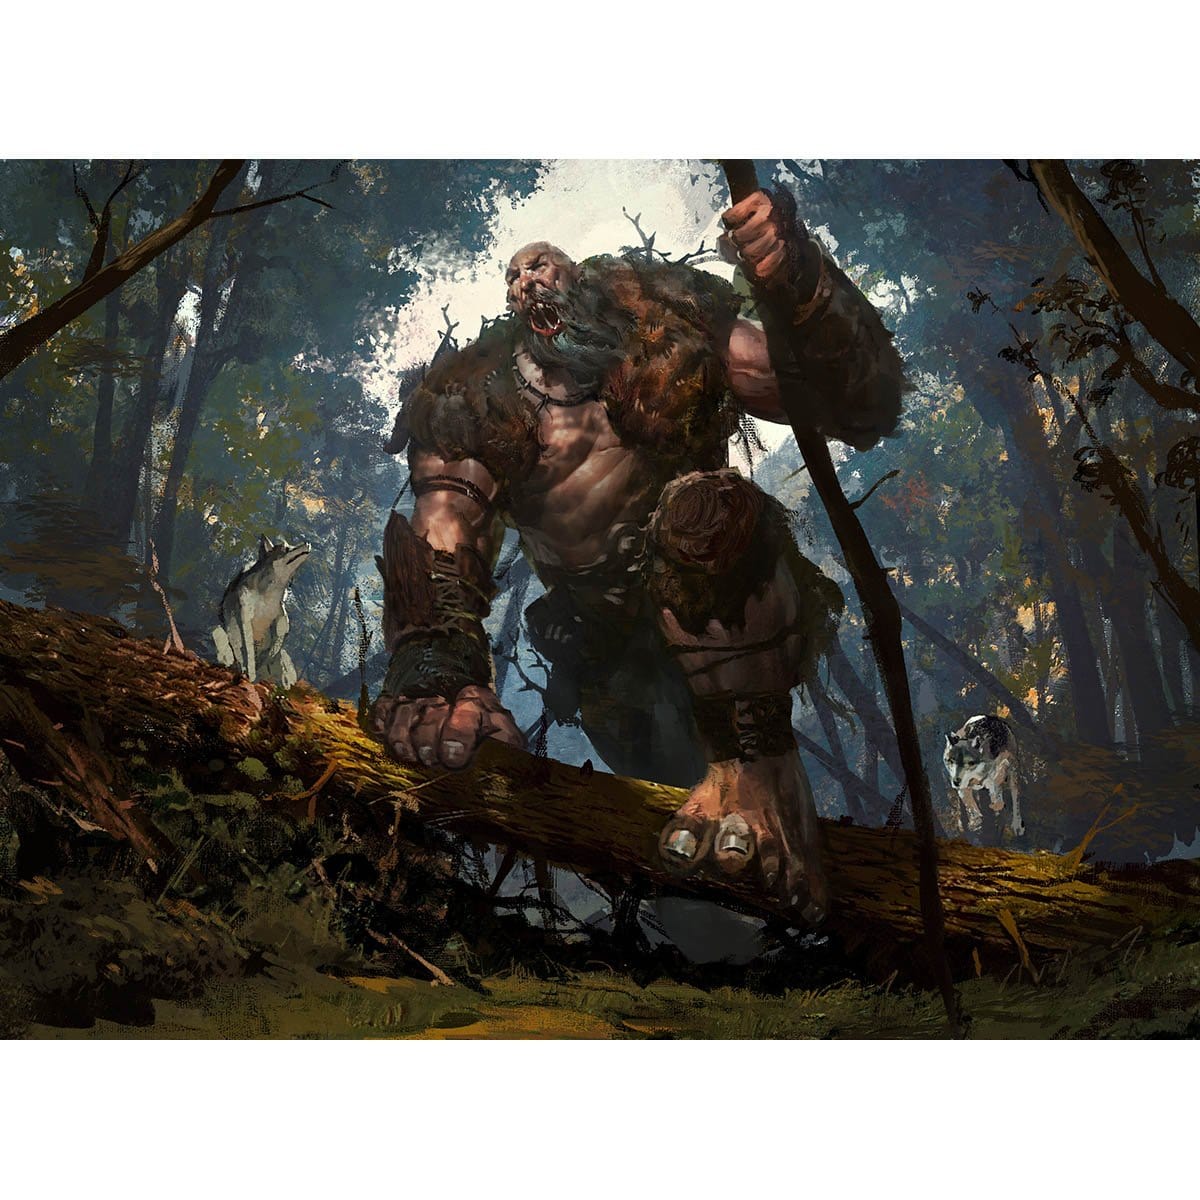 Howling Giant Print - Print - Original Magic Art - Accessories for Magic the Gathering and other card games